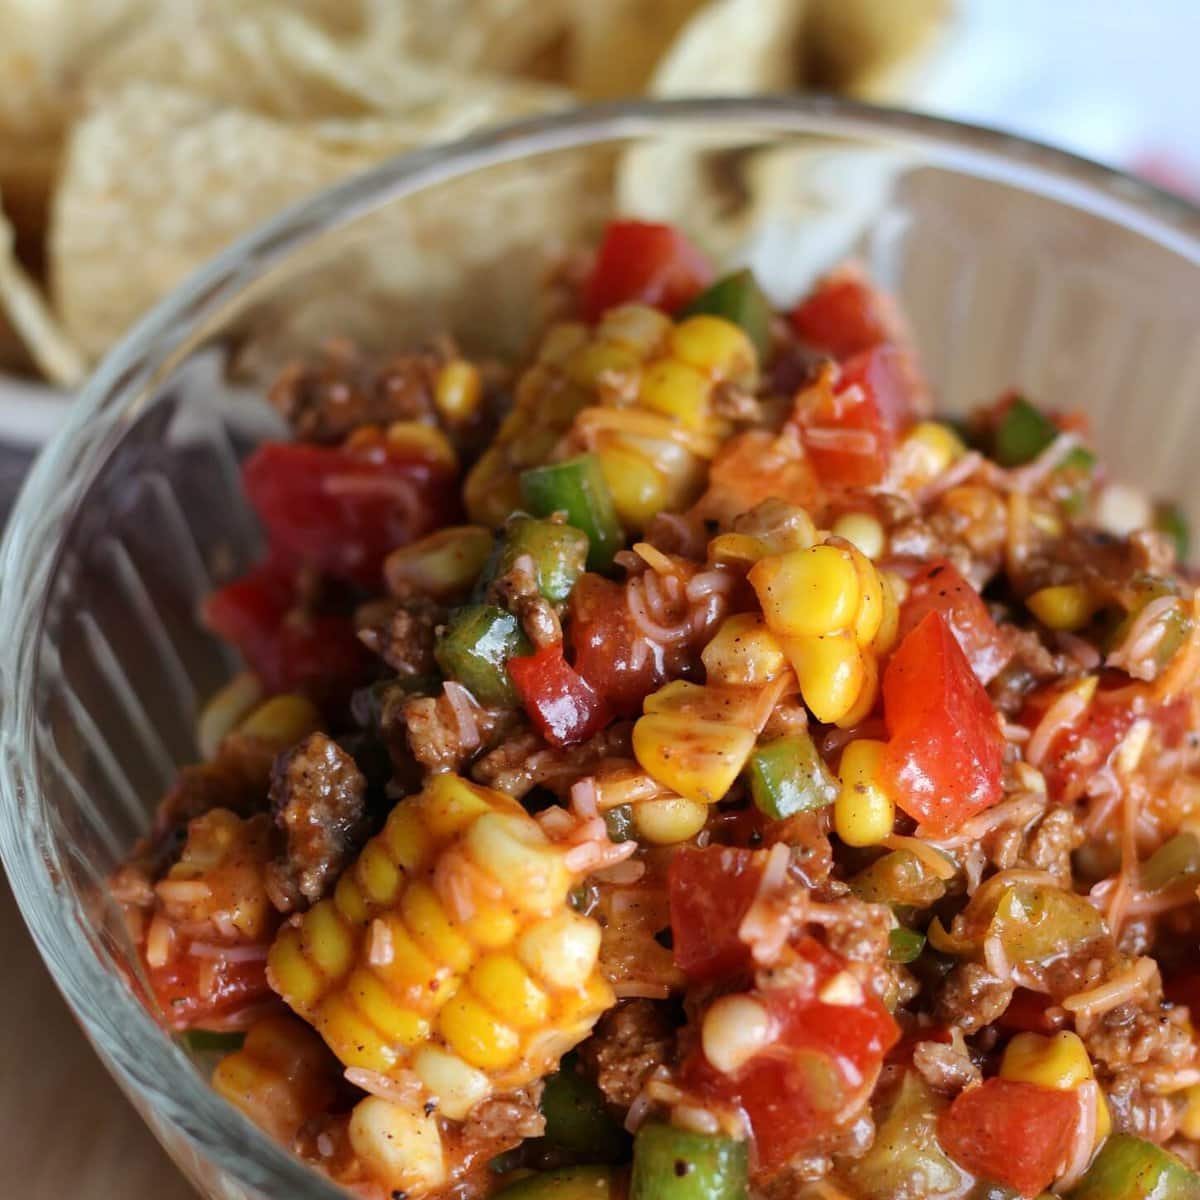 Image of Chopped Taco Salad in a glass bowl with Tortilla Chips